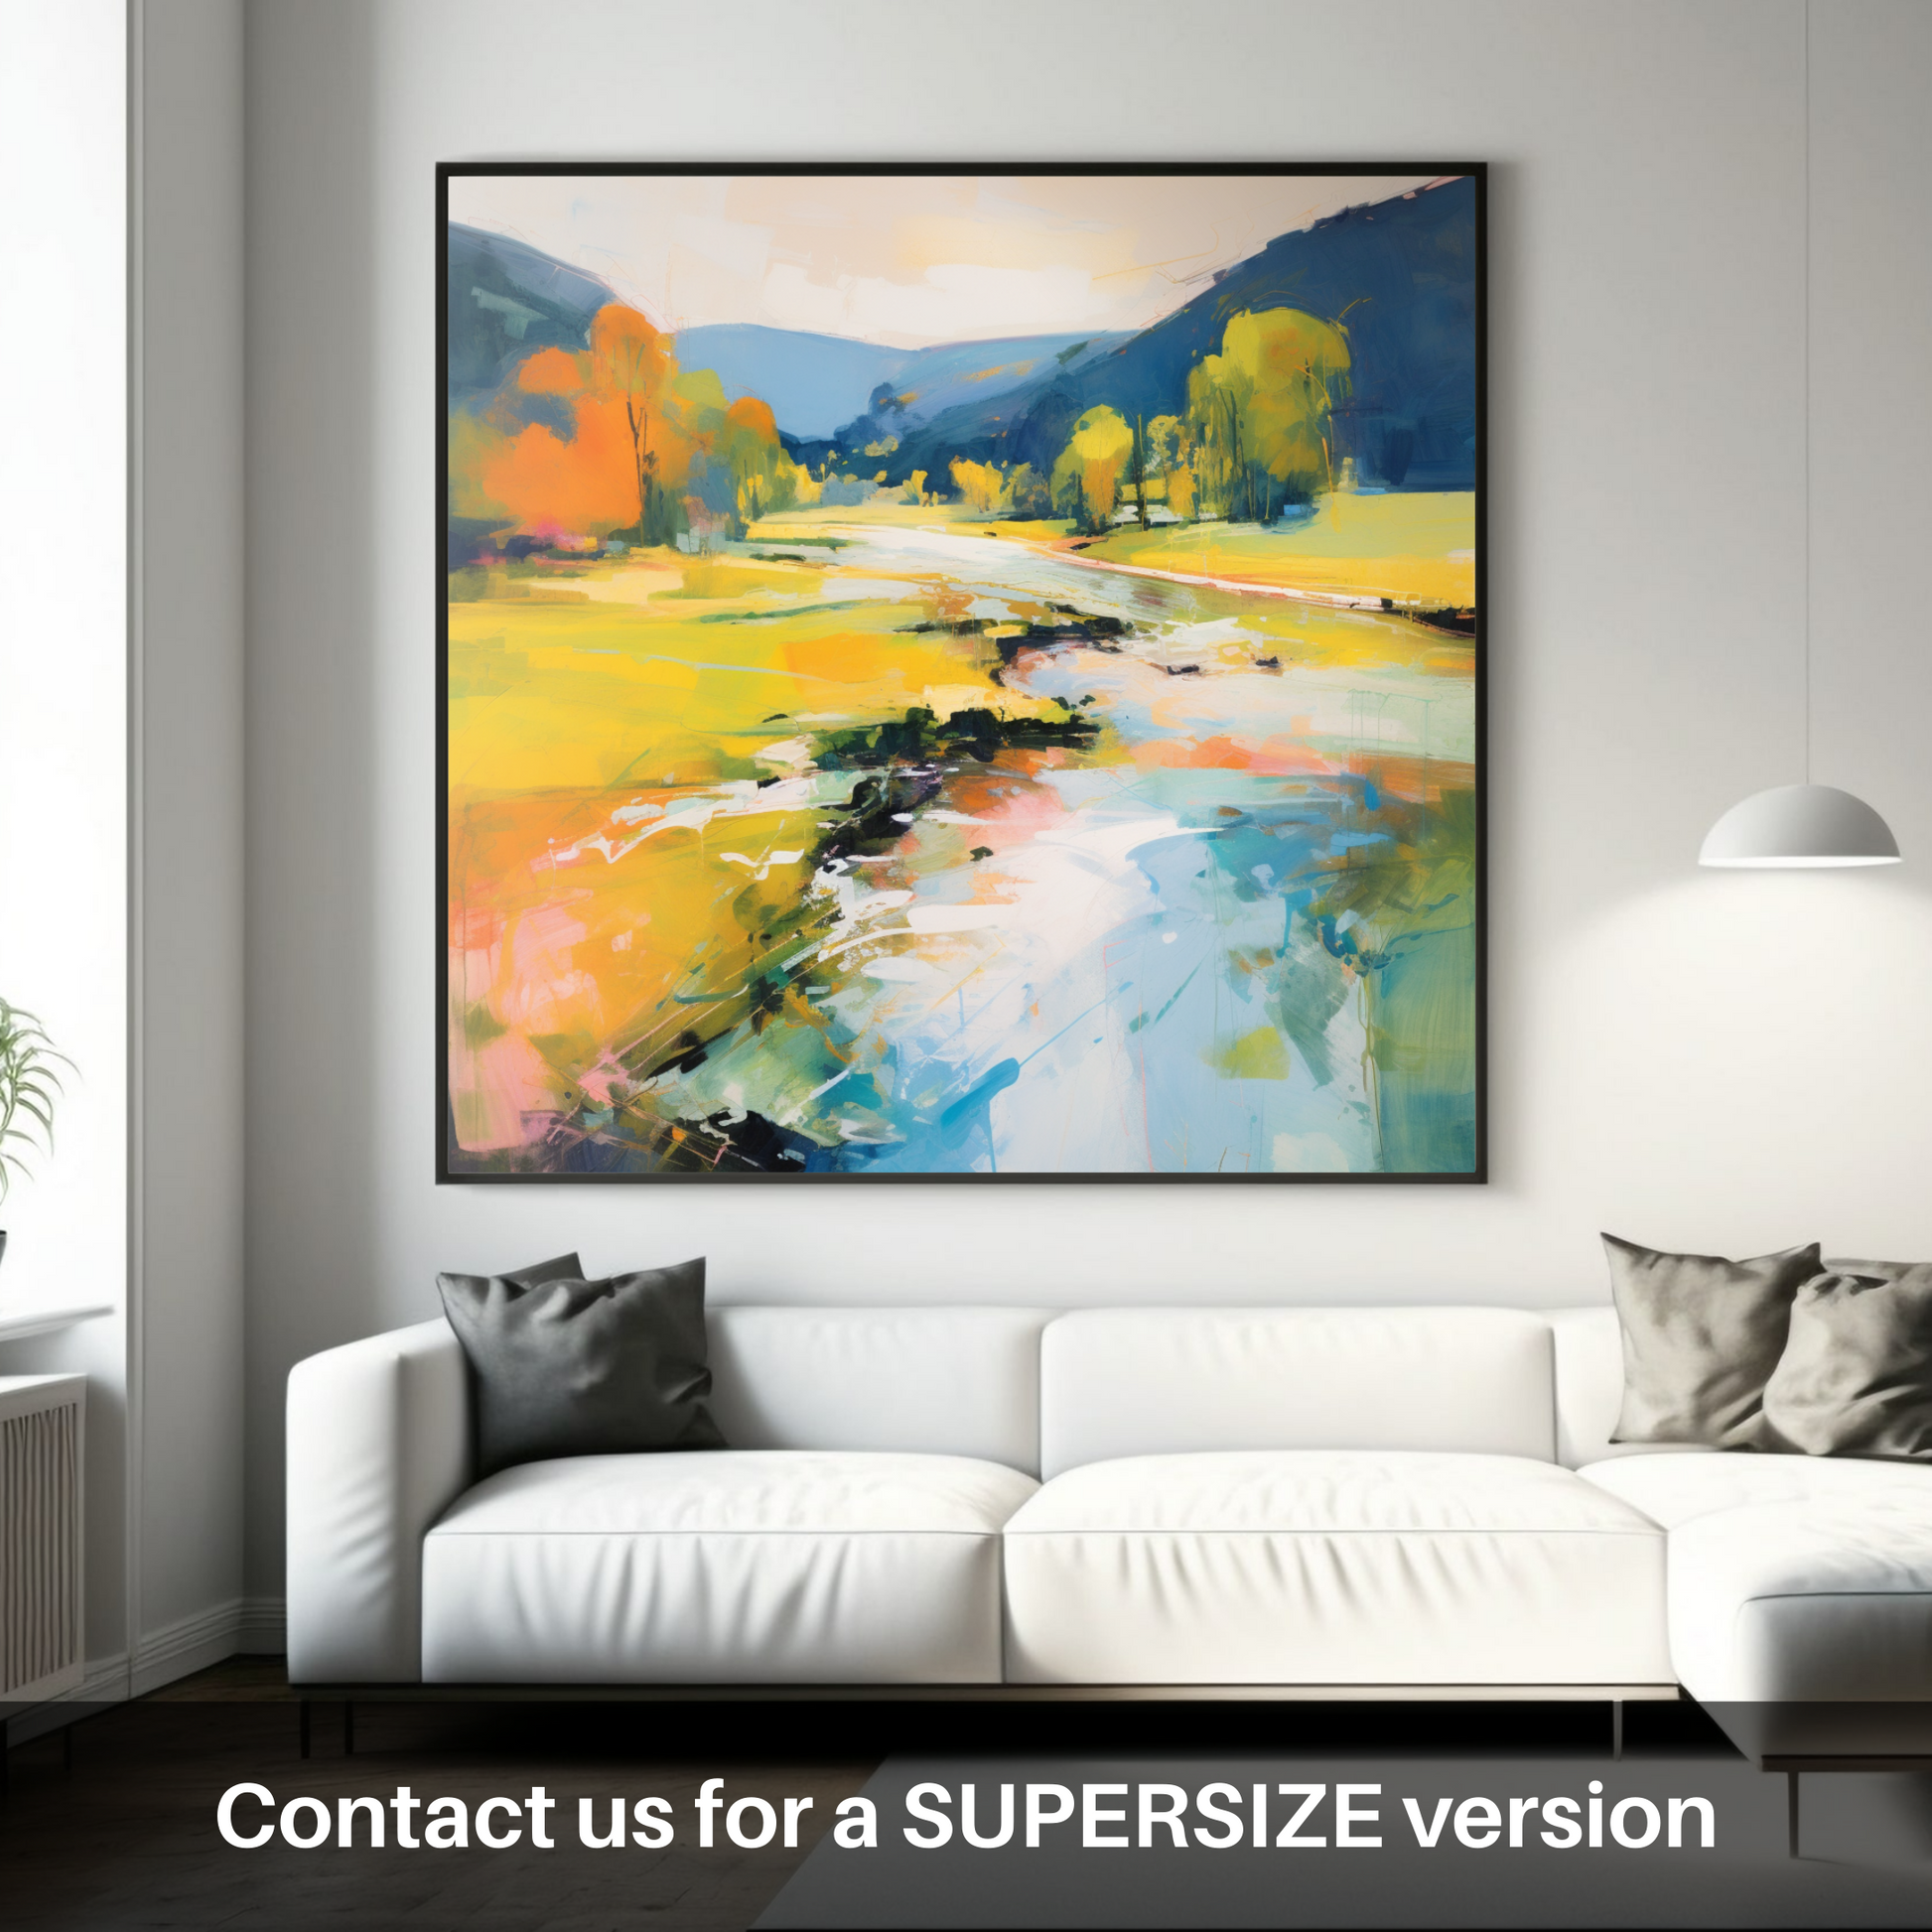 Huge supersize print of River Earn, Perthshire in summer